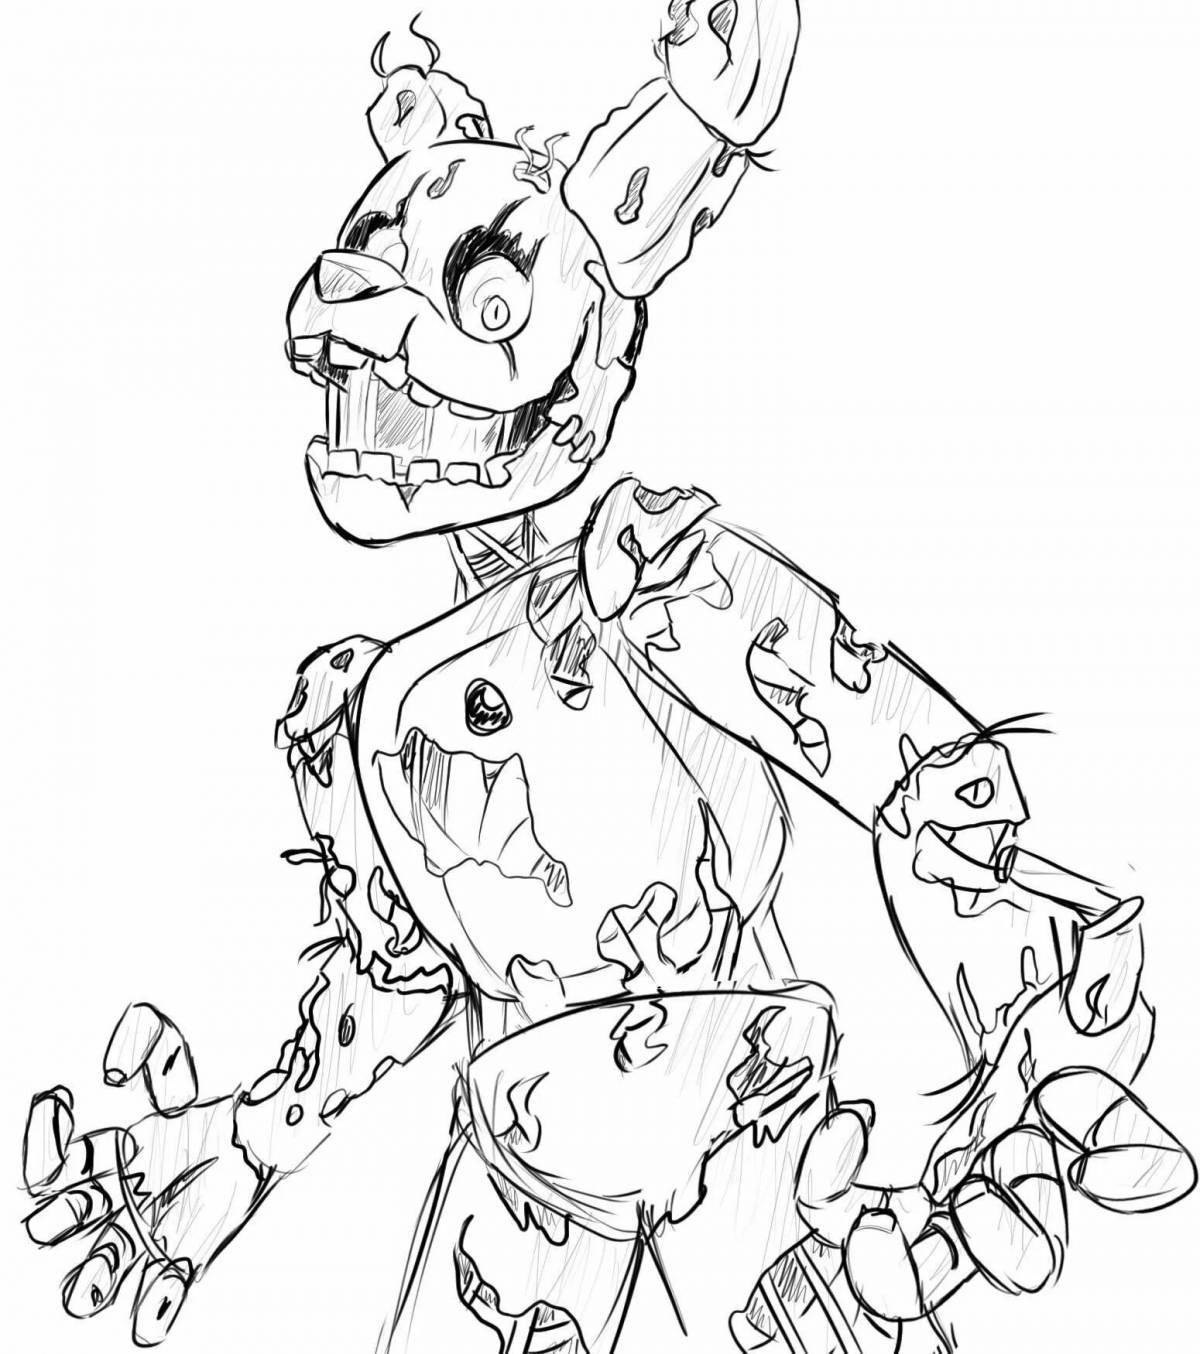 Exciting springtrap coloring